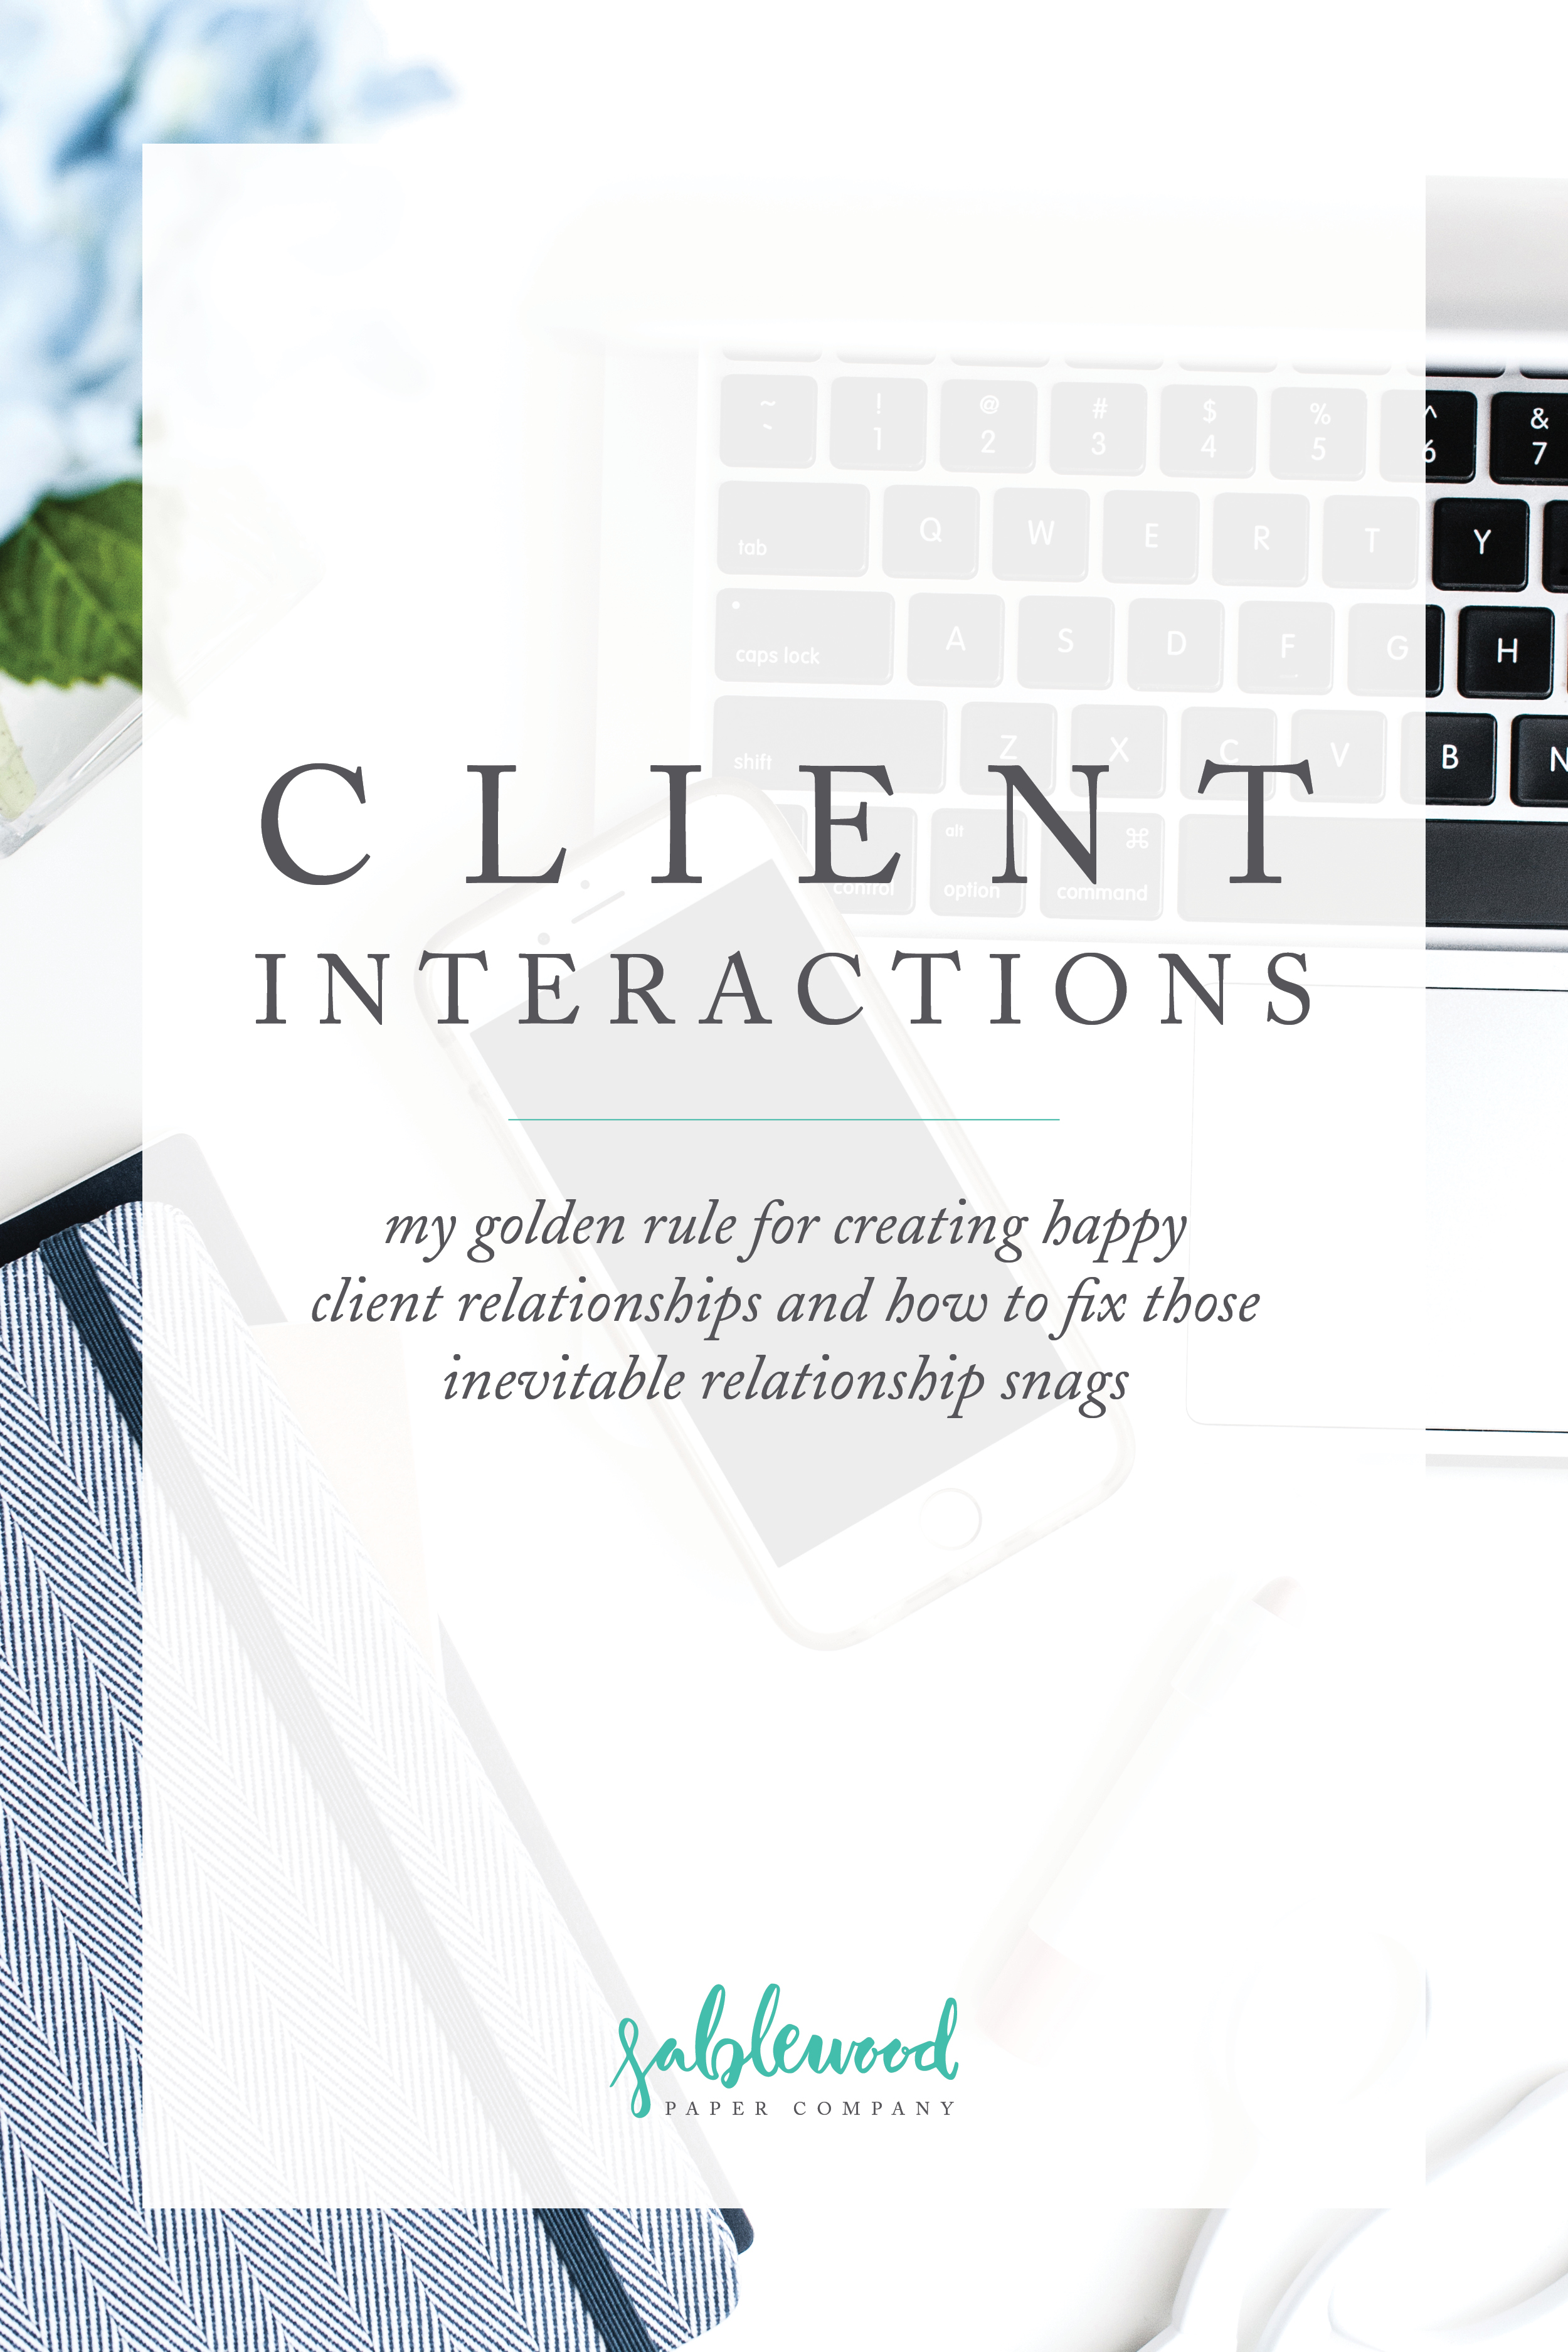 On the Blog: Client Interactions